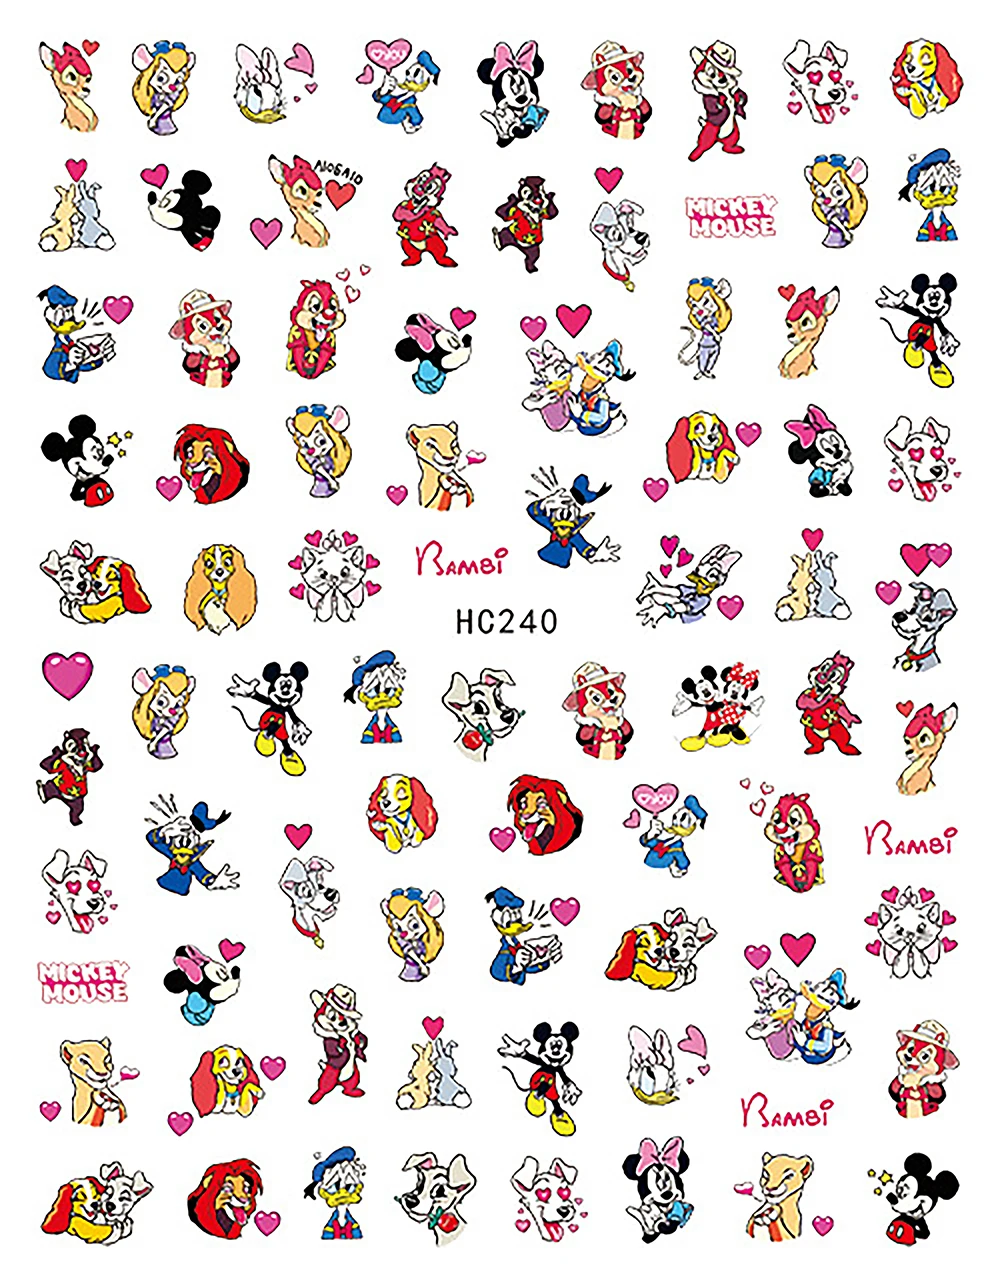 Cute Lilo & Stitch Mickey Mouse Cartoon Nail Stickers Nail Art Accessories Disney Princess Dumbo Nail Decals Nail Art Supplies images - 6